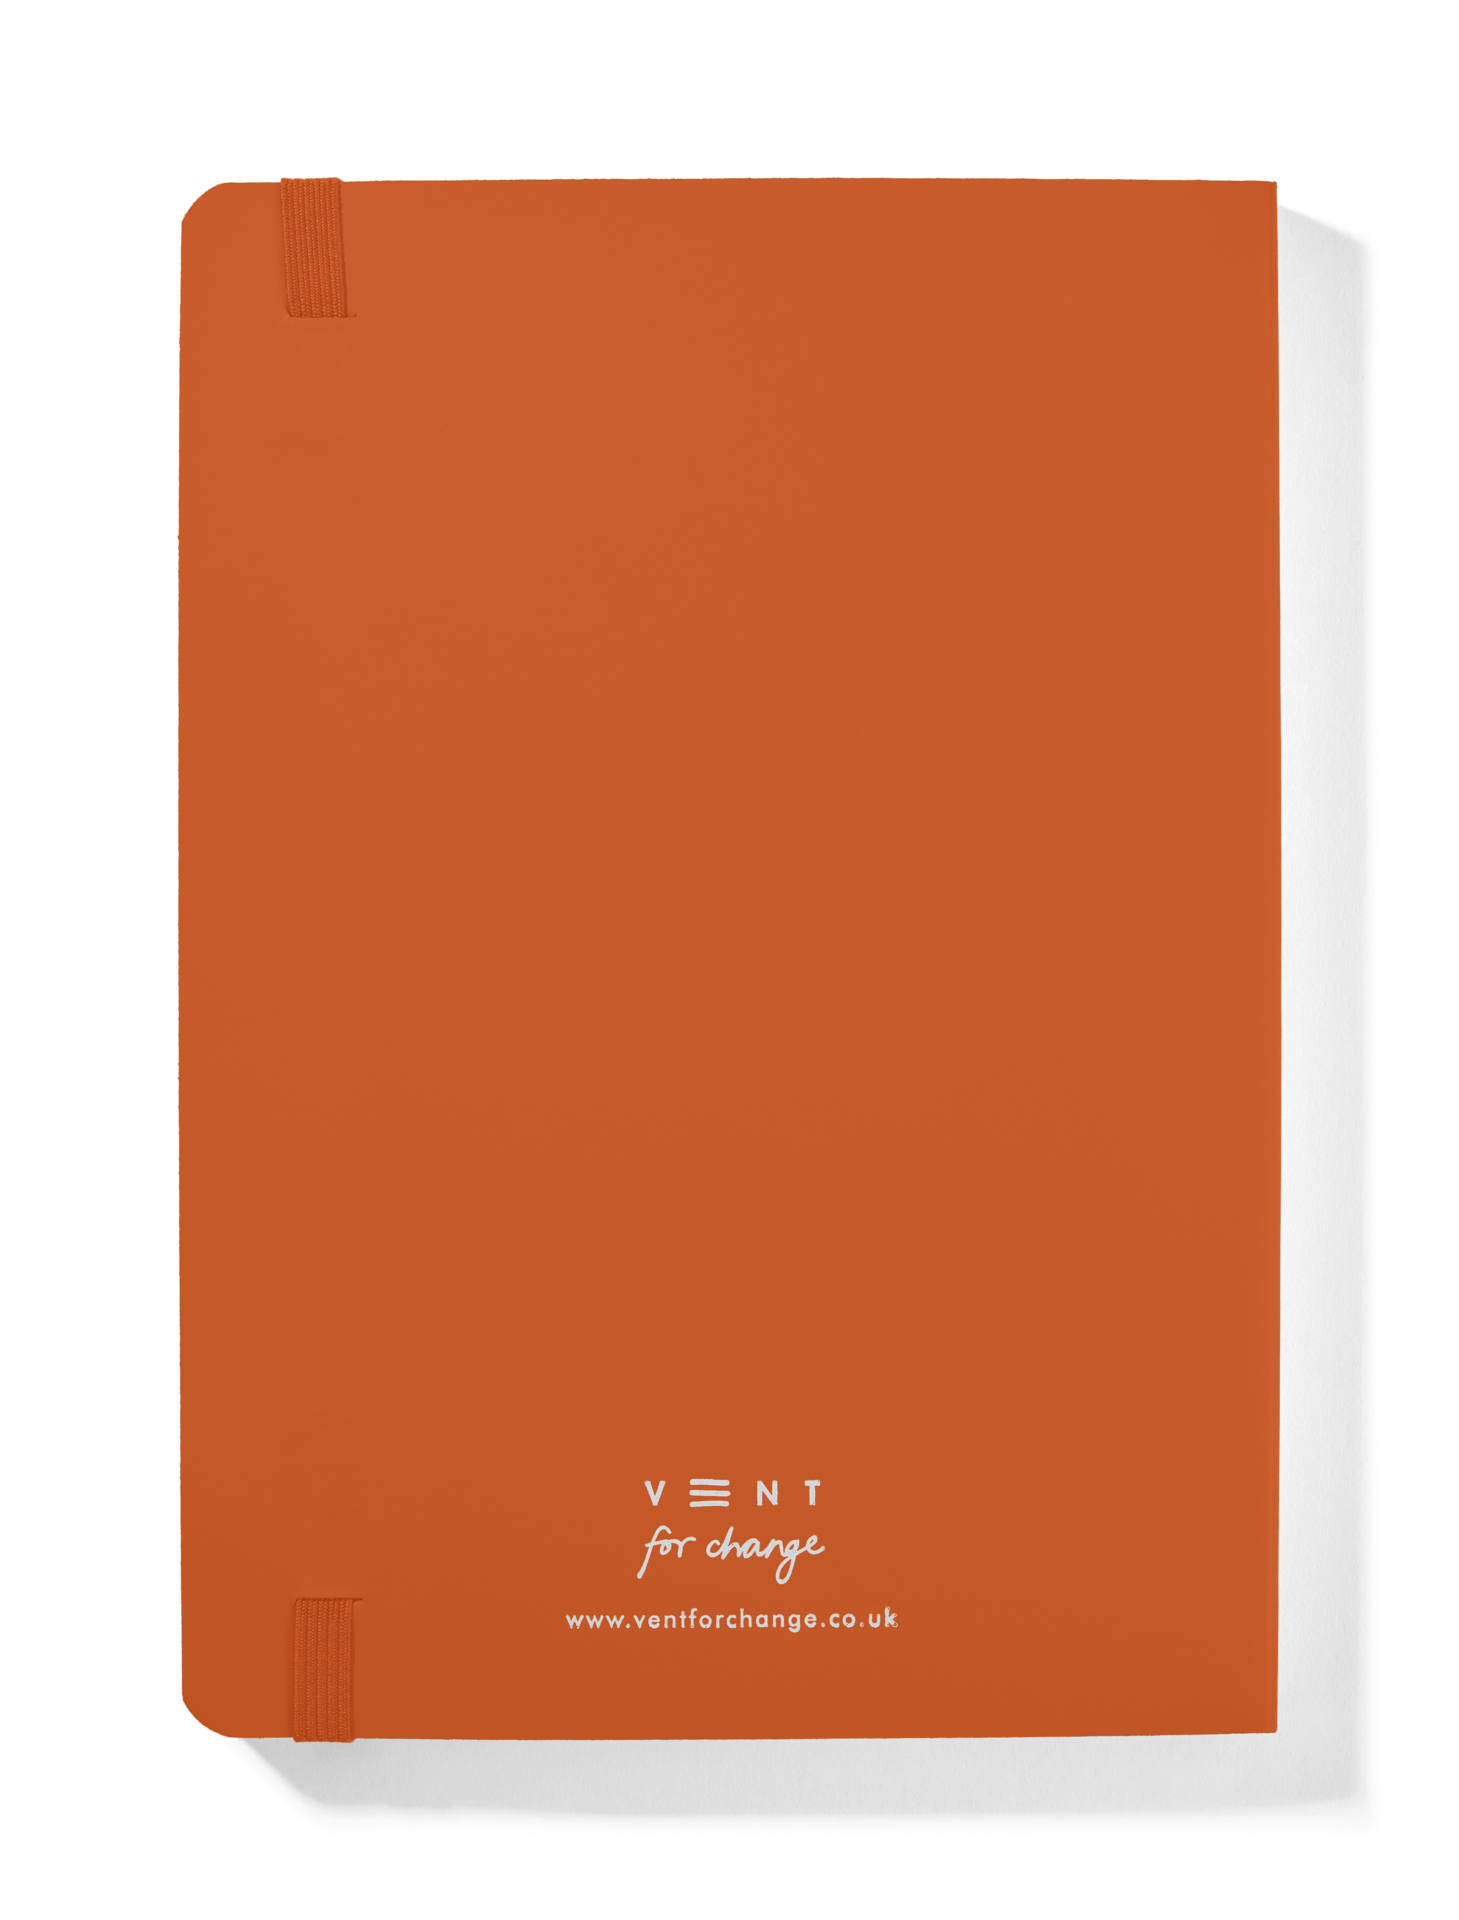 Recycled Leather A5 Lined Notebook - Burnt Orange